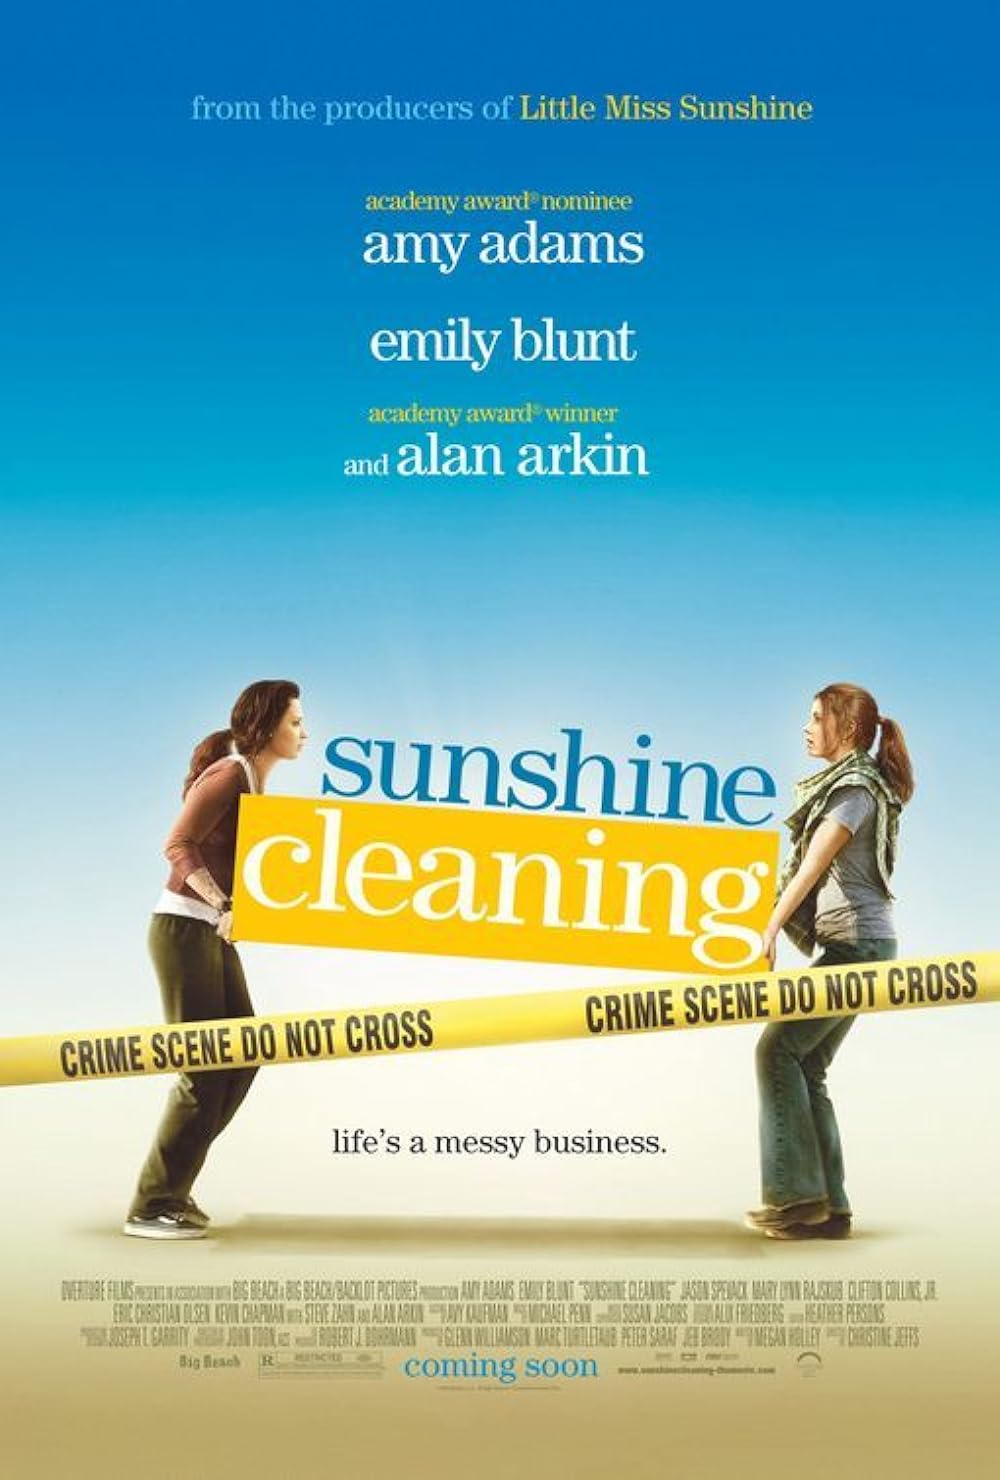 adam cioni recommends Sunshine Cleaning Topless Cleaning